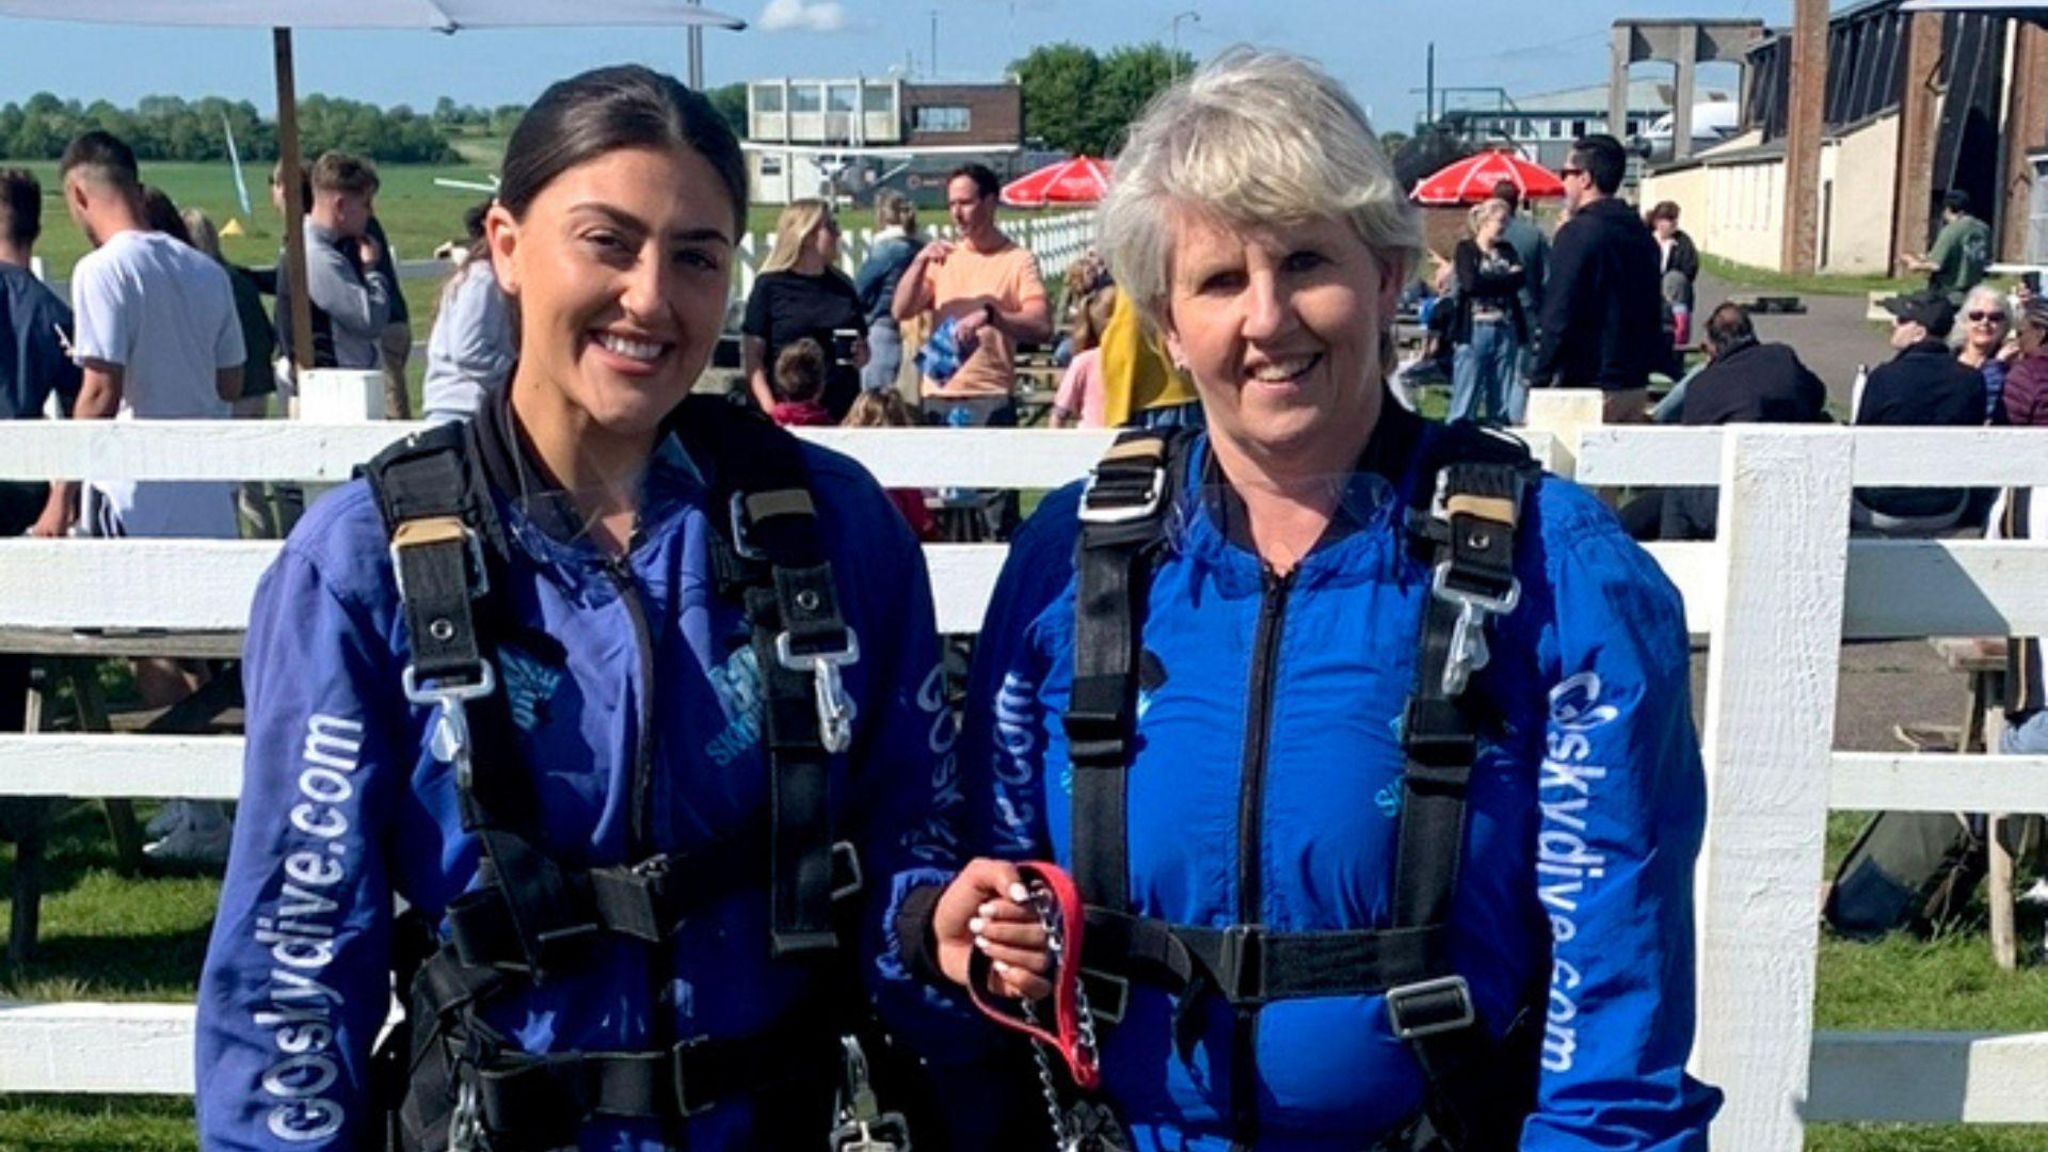 Georgia Edwards and her mother when they participated in a sky dive together last year